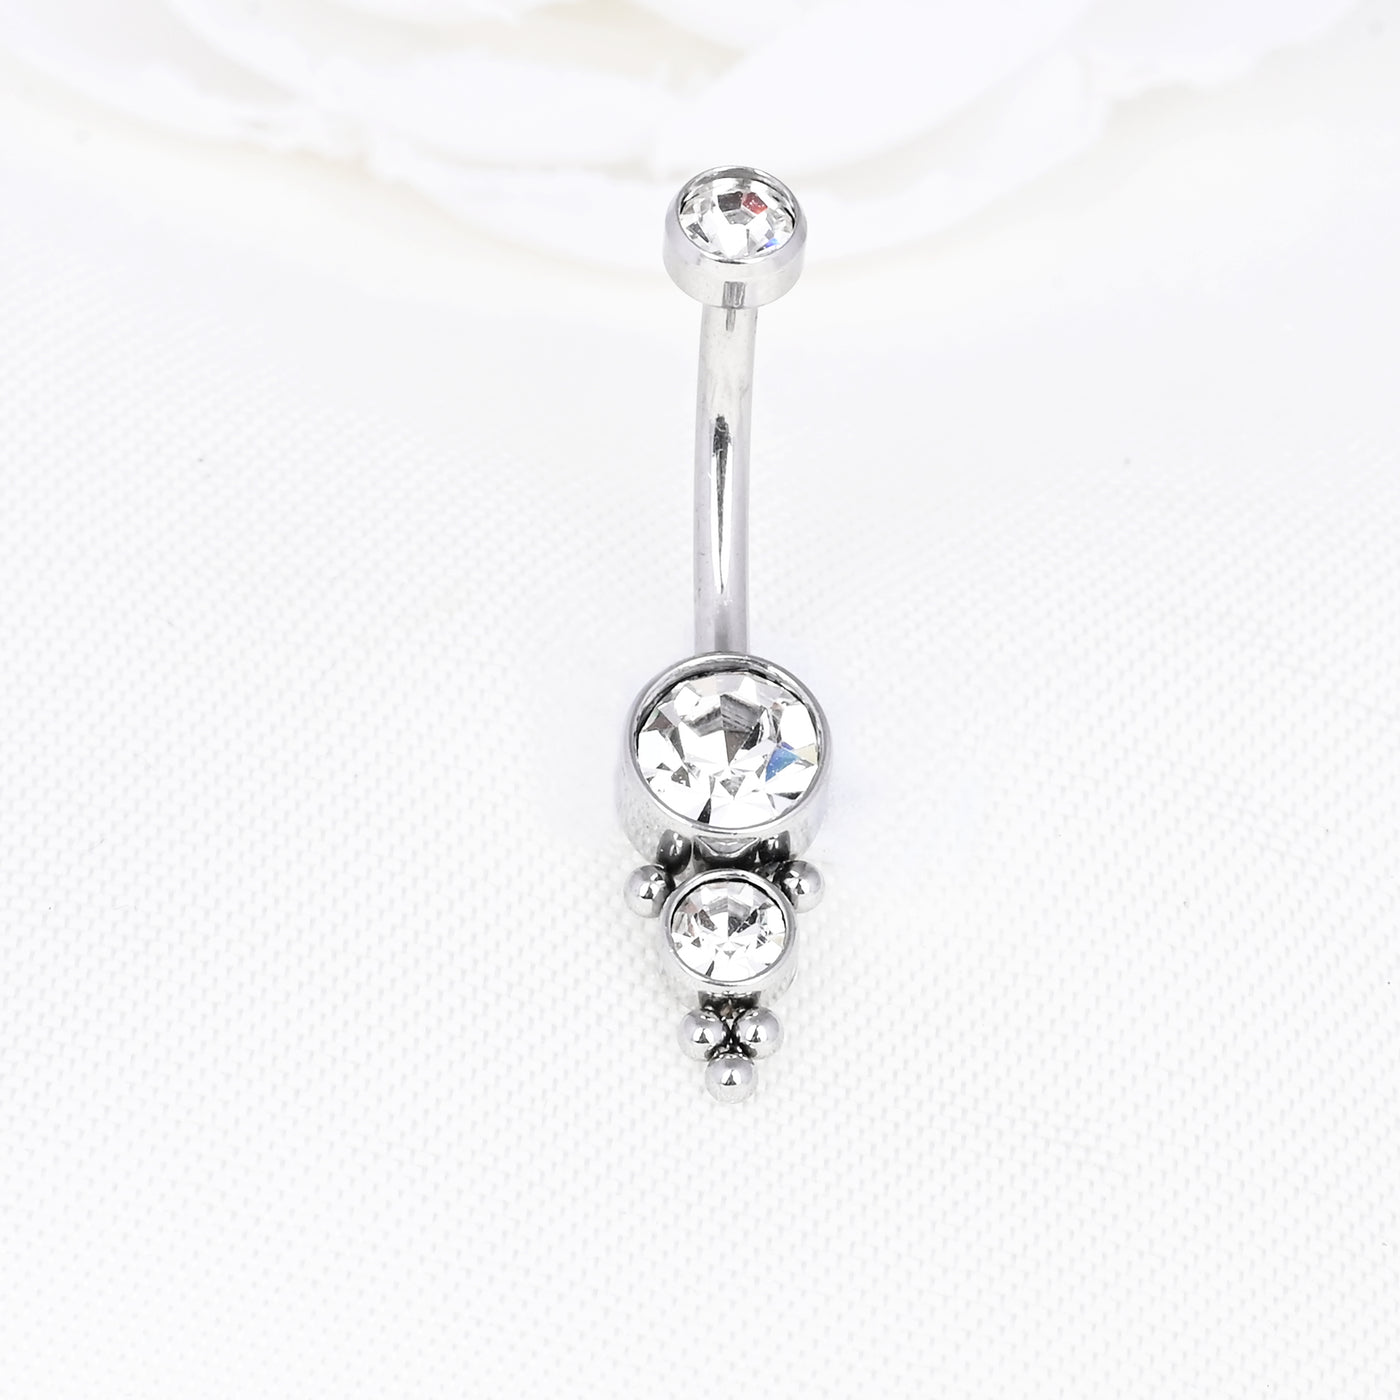 14G  Clear Gems Belly Button Ring